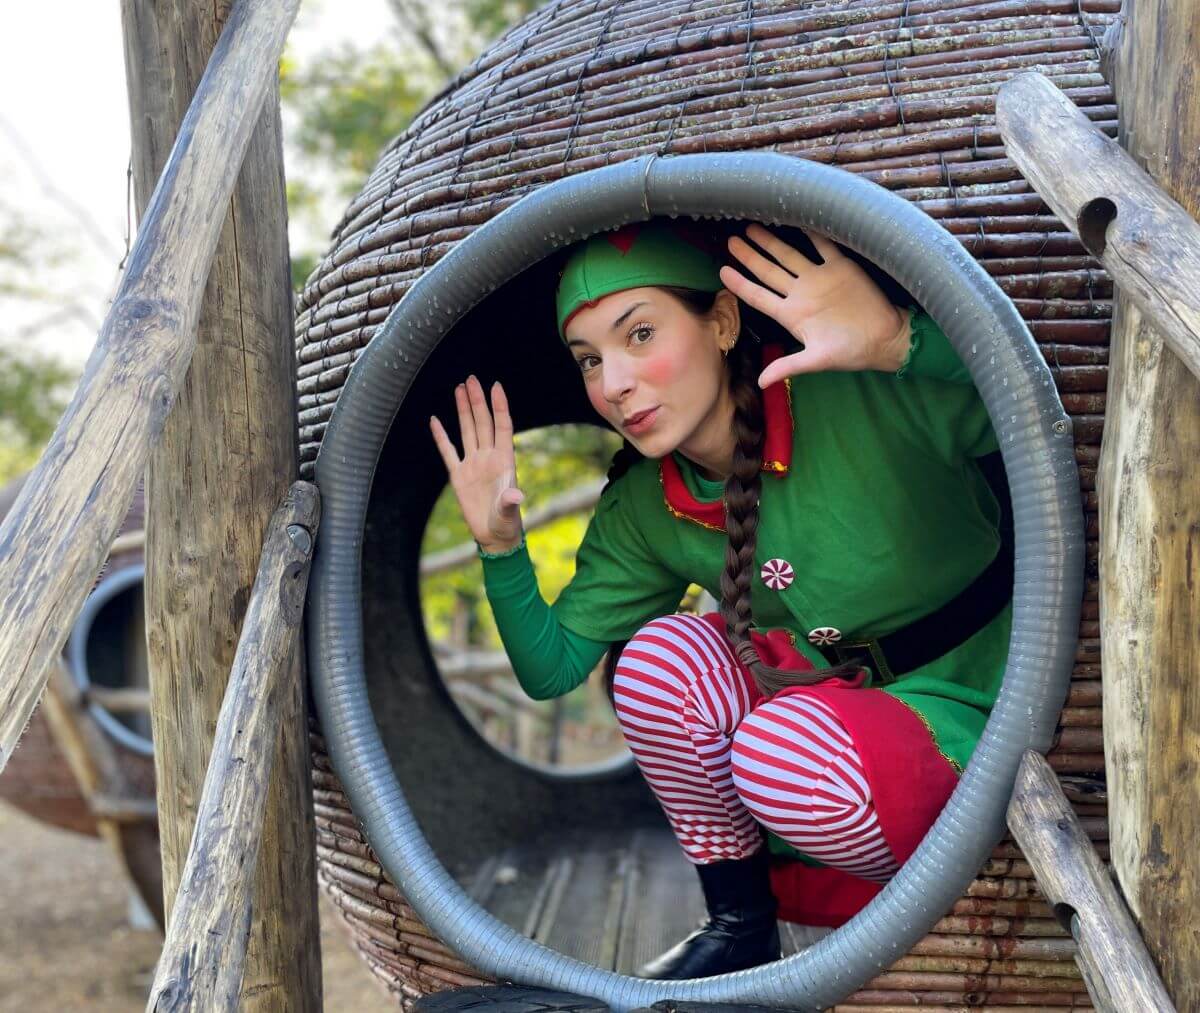 A Christmas elf playing in a playground